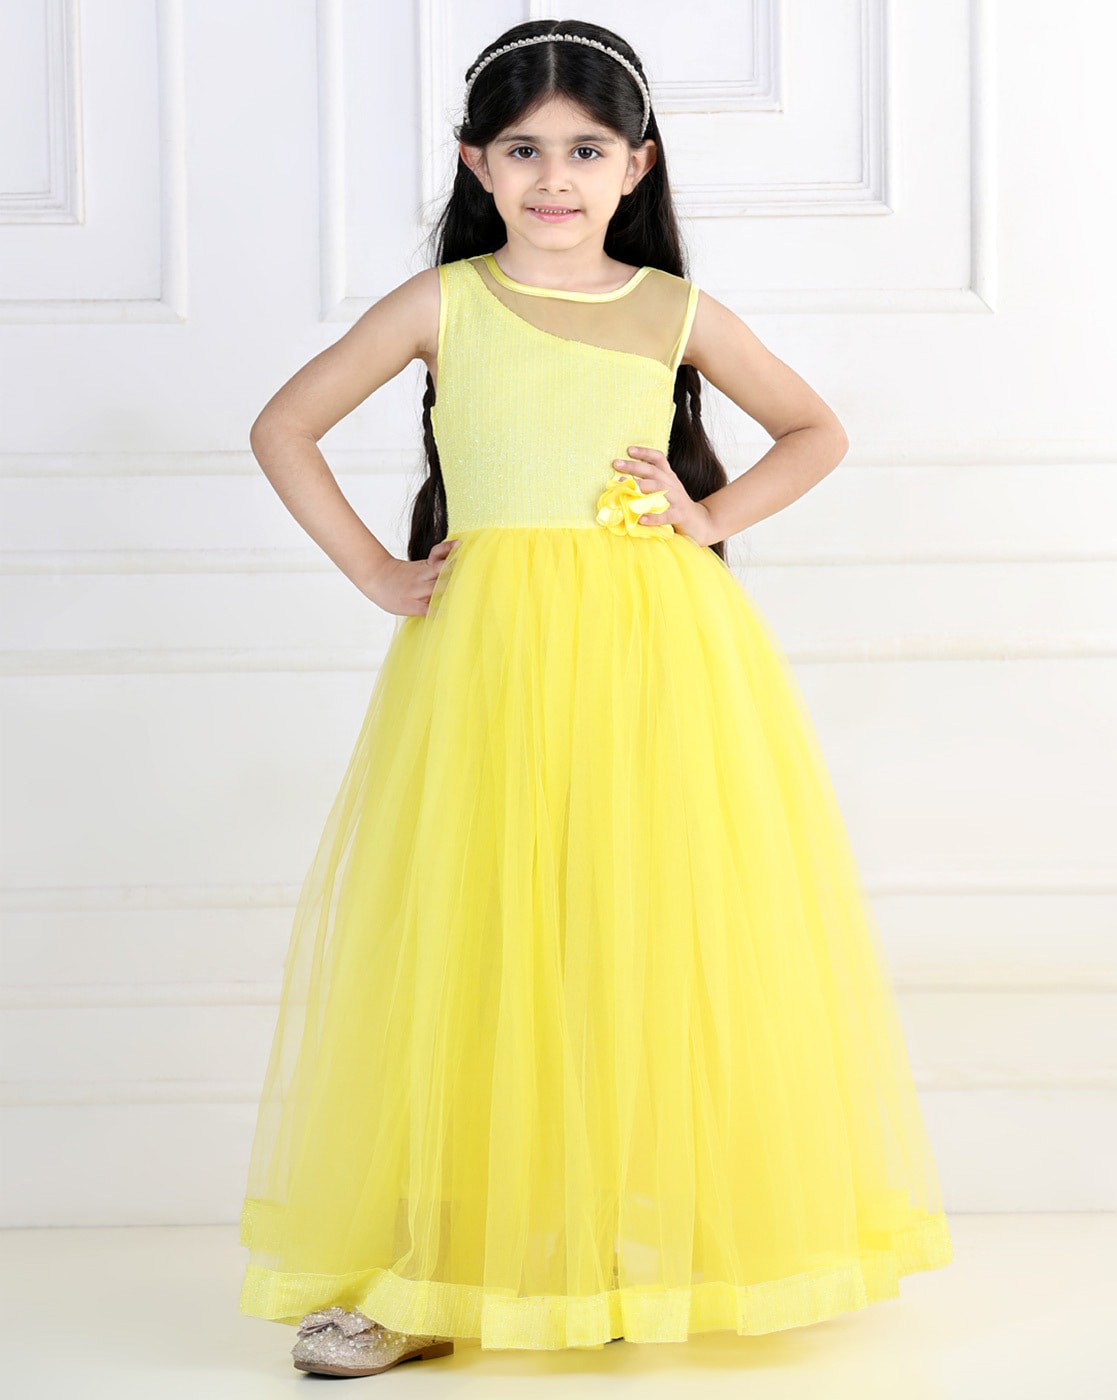 YWDJ 1-7Years Girls Dress Toddler Solid Color Retro 3D Flowers Short Sleeve  Birthday Party Gown Kids Dresses Yellow 3-4 Years - Walmart.com